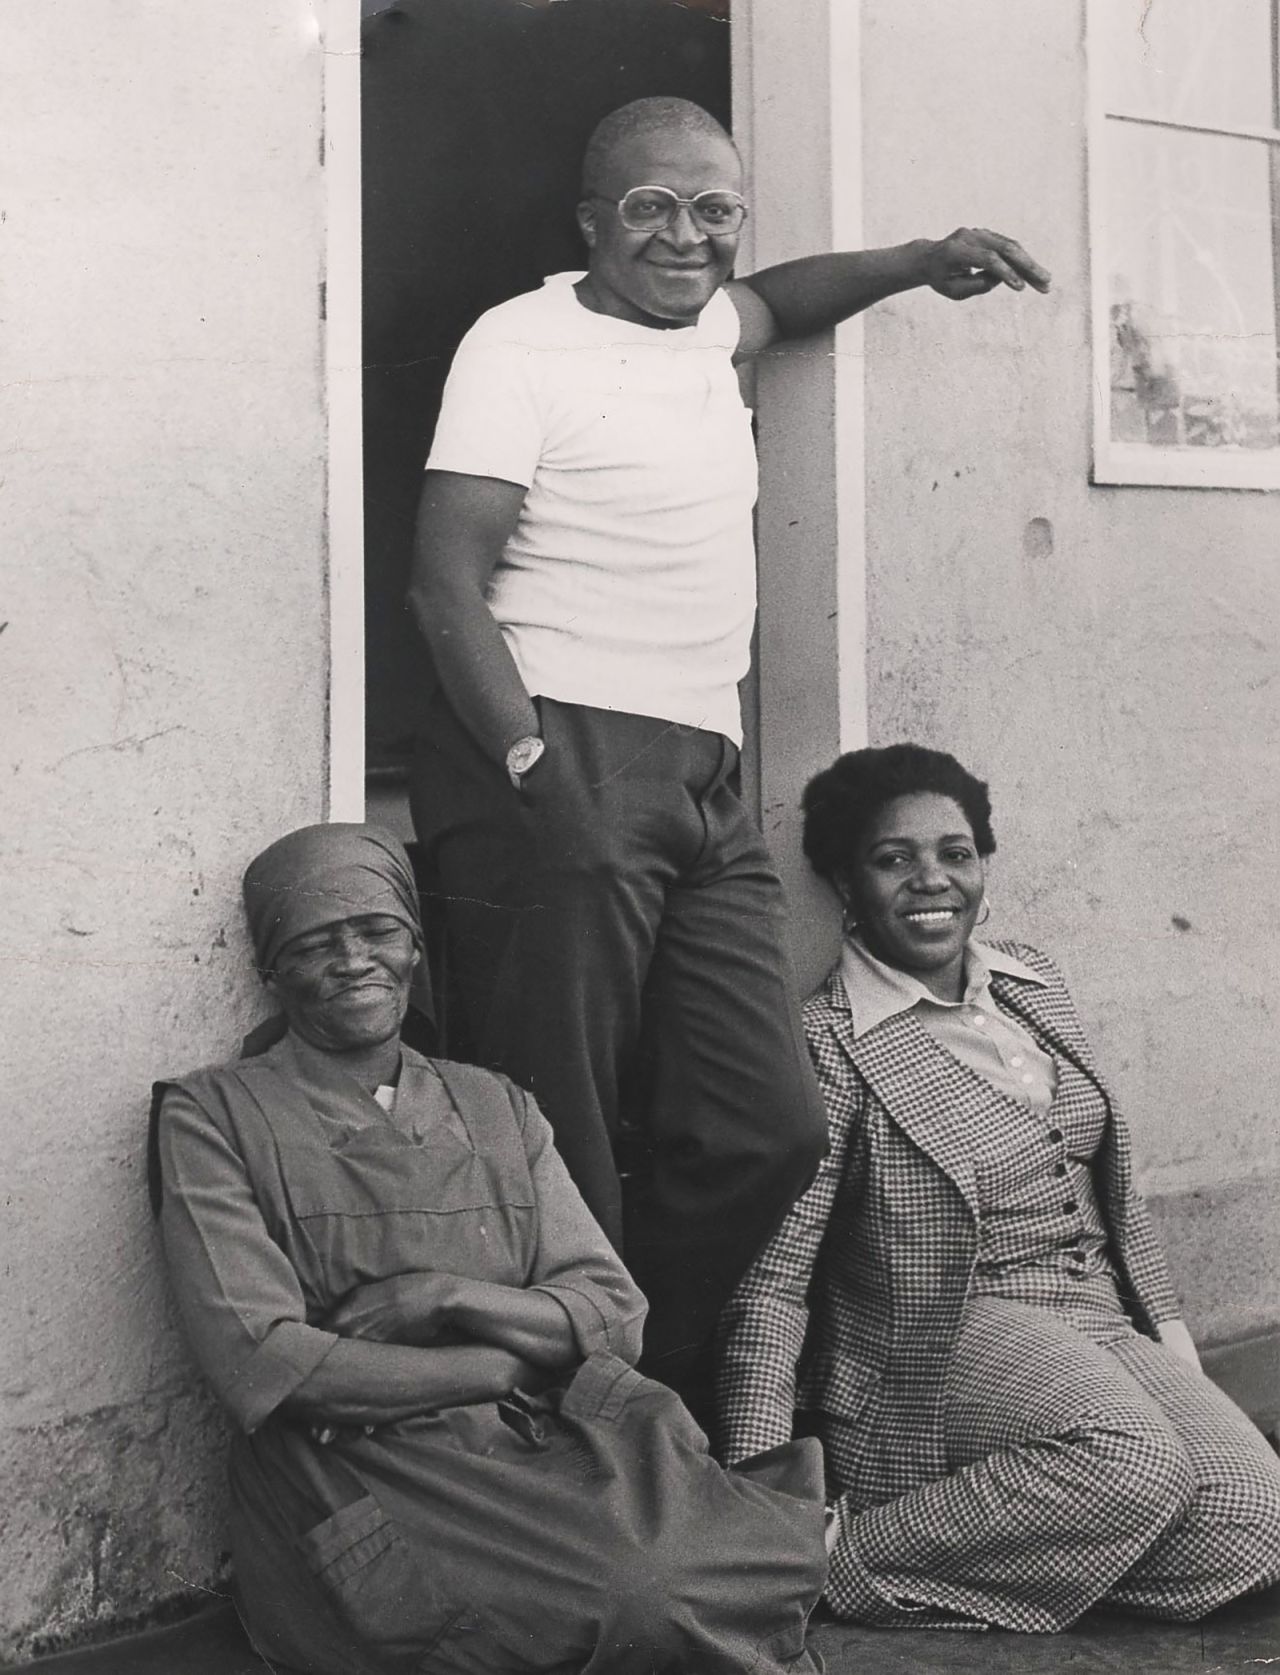 Tutu is seen with his mother-in-law, Johanna Shenxane, and his wife, Leah, in the Kagiso township west of Johannesburg, circa 1970. Tutu resigned as a teacher in 1957, protesting government restrictions on education for black children. He was ordained as an Anglican priest in 1961, and in 1975 he became the first black appointed Anglican dean of St. Mary's Cathedral in Johannesburg.